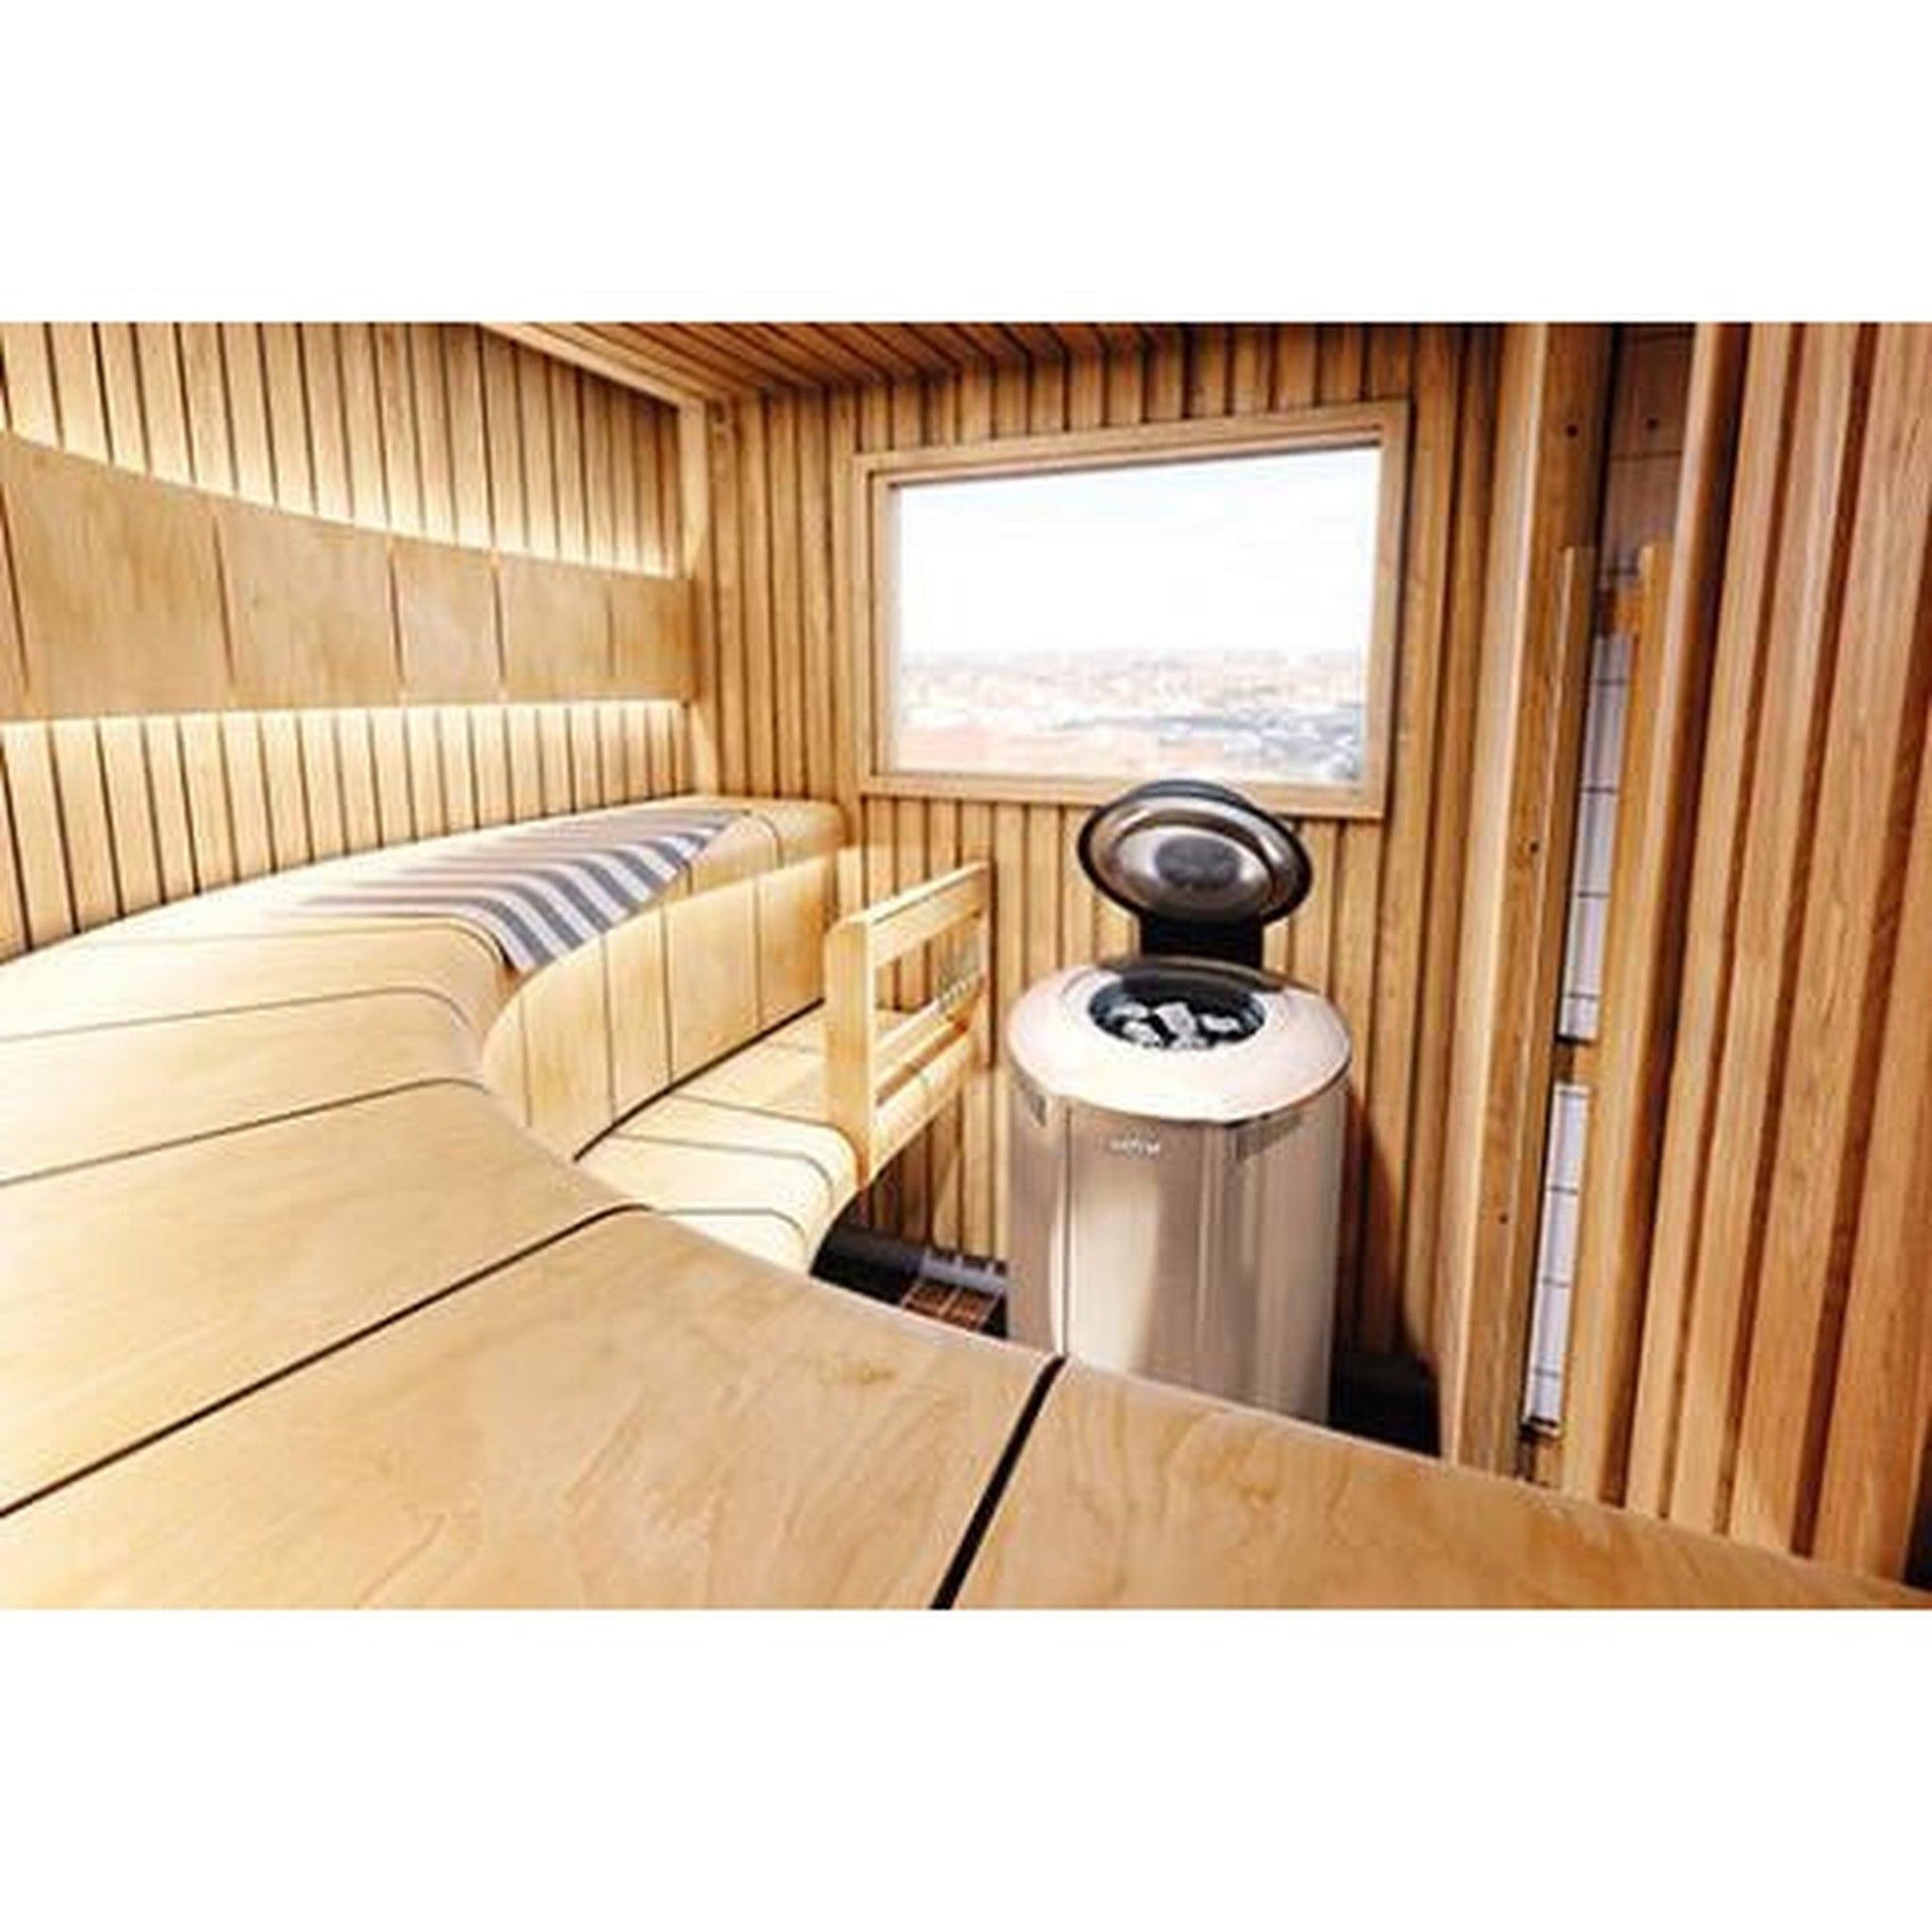 Harvia Forte 4.4 kW 240V 1PH Stainless Steel Sauna Heater With Digital Control Panel